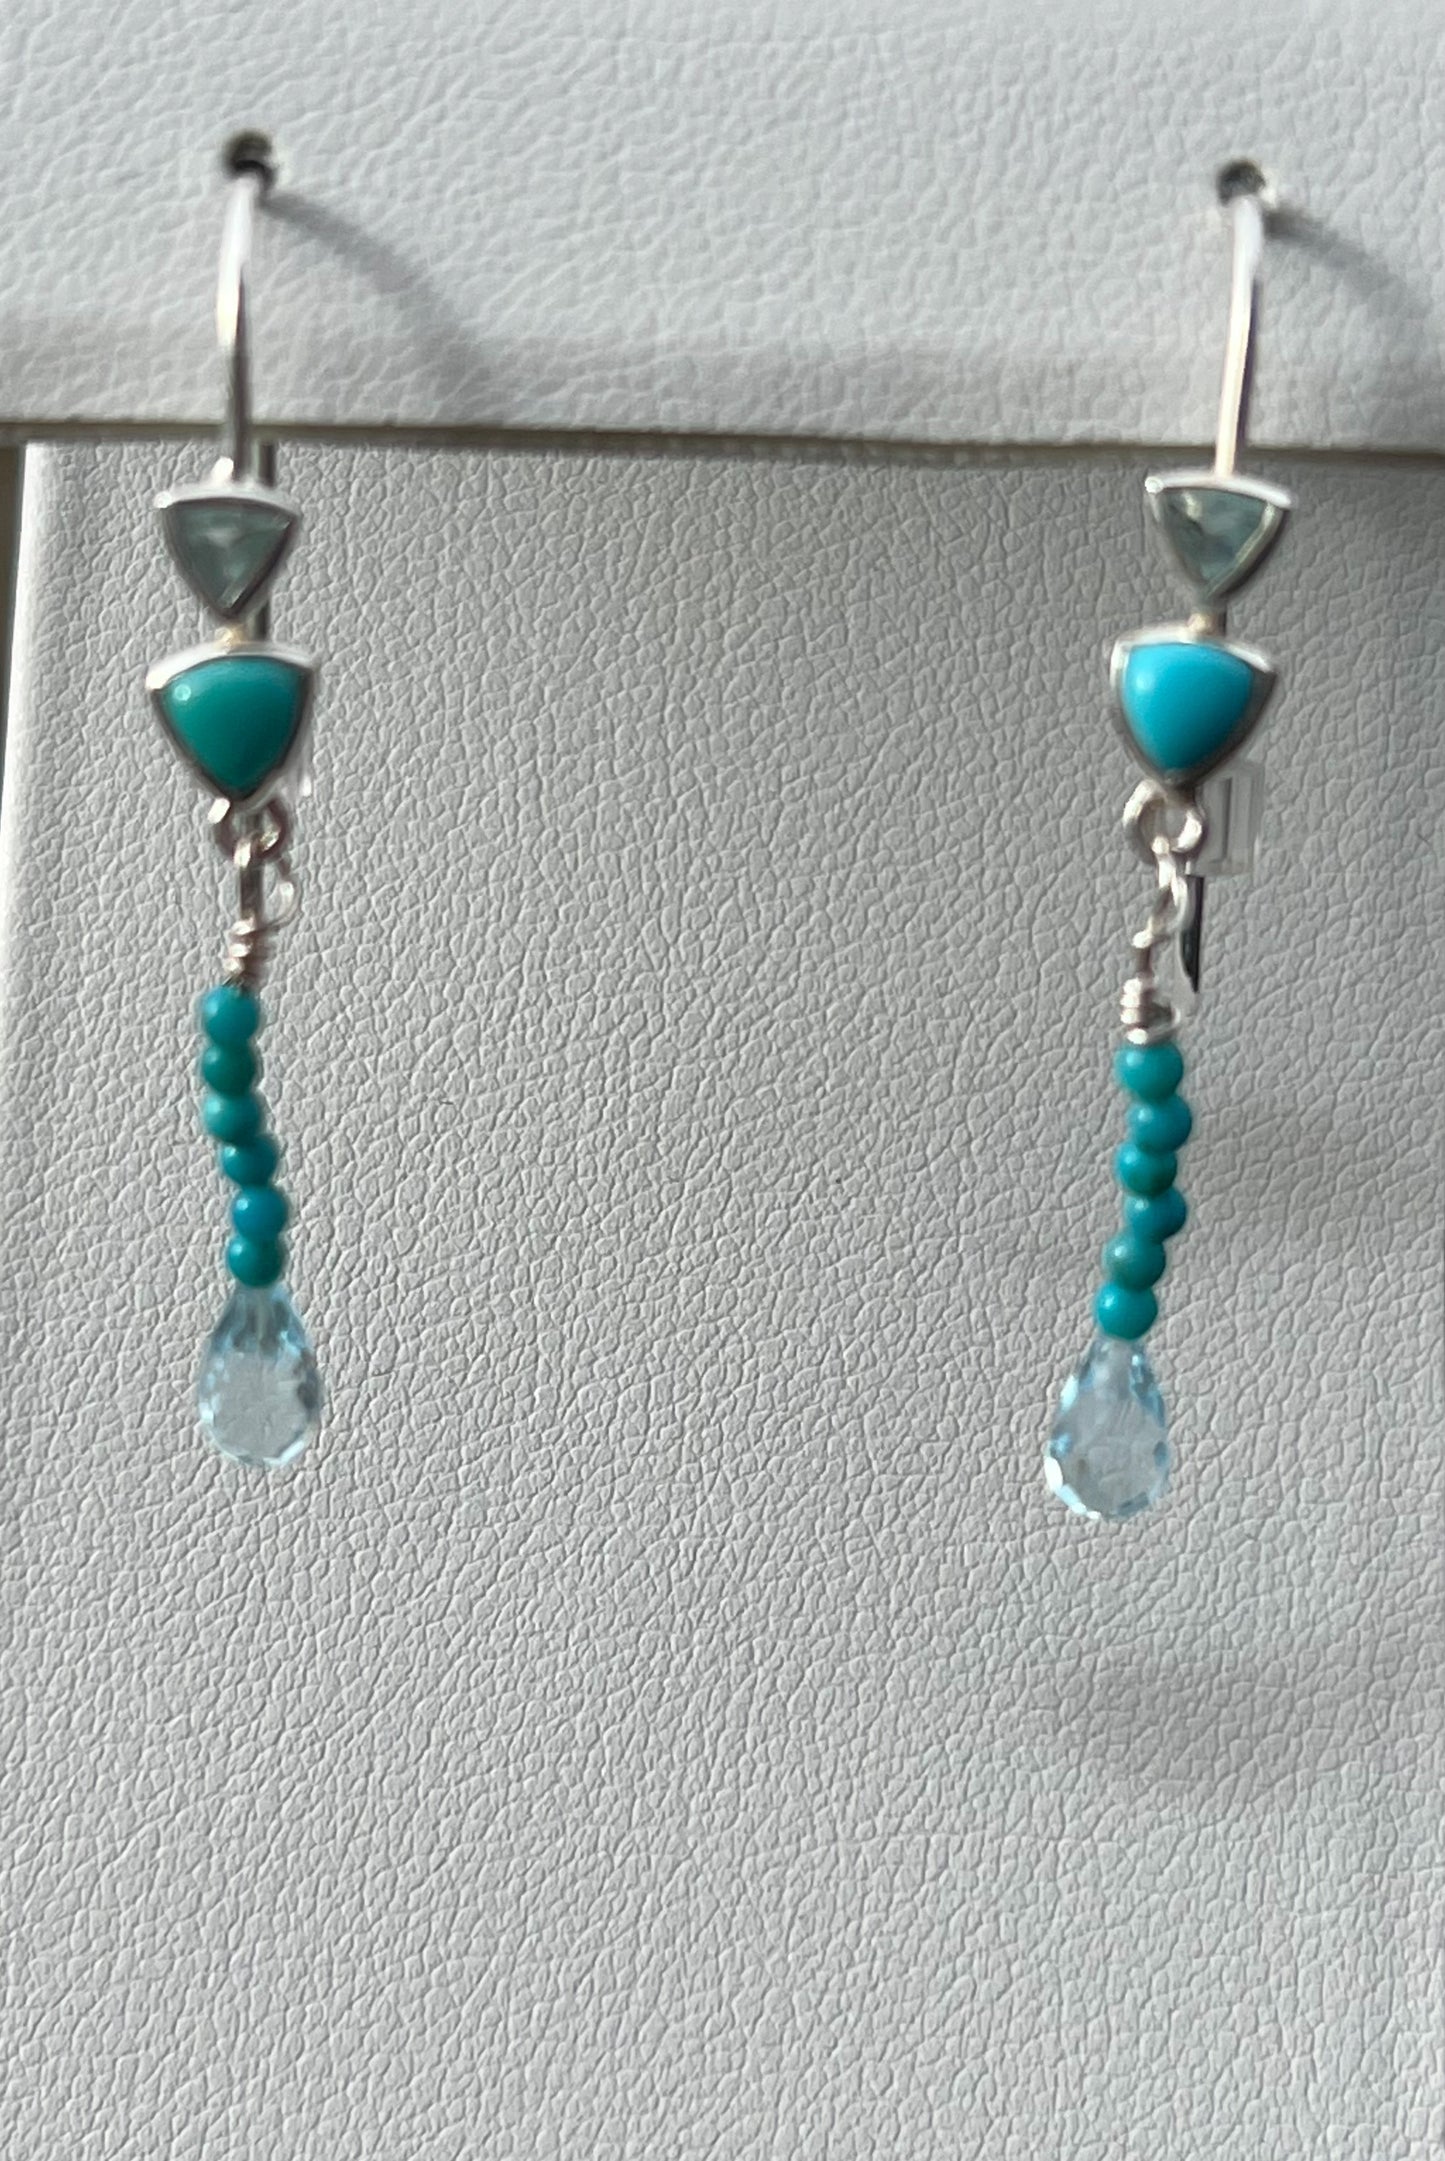 Sleeping Beauty Turquoise and Blue Topaz Earrings